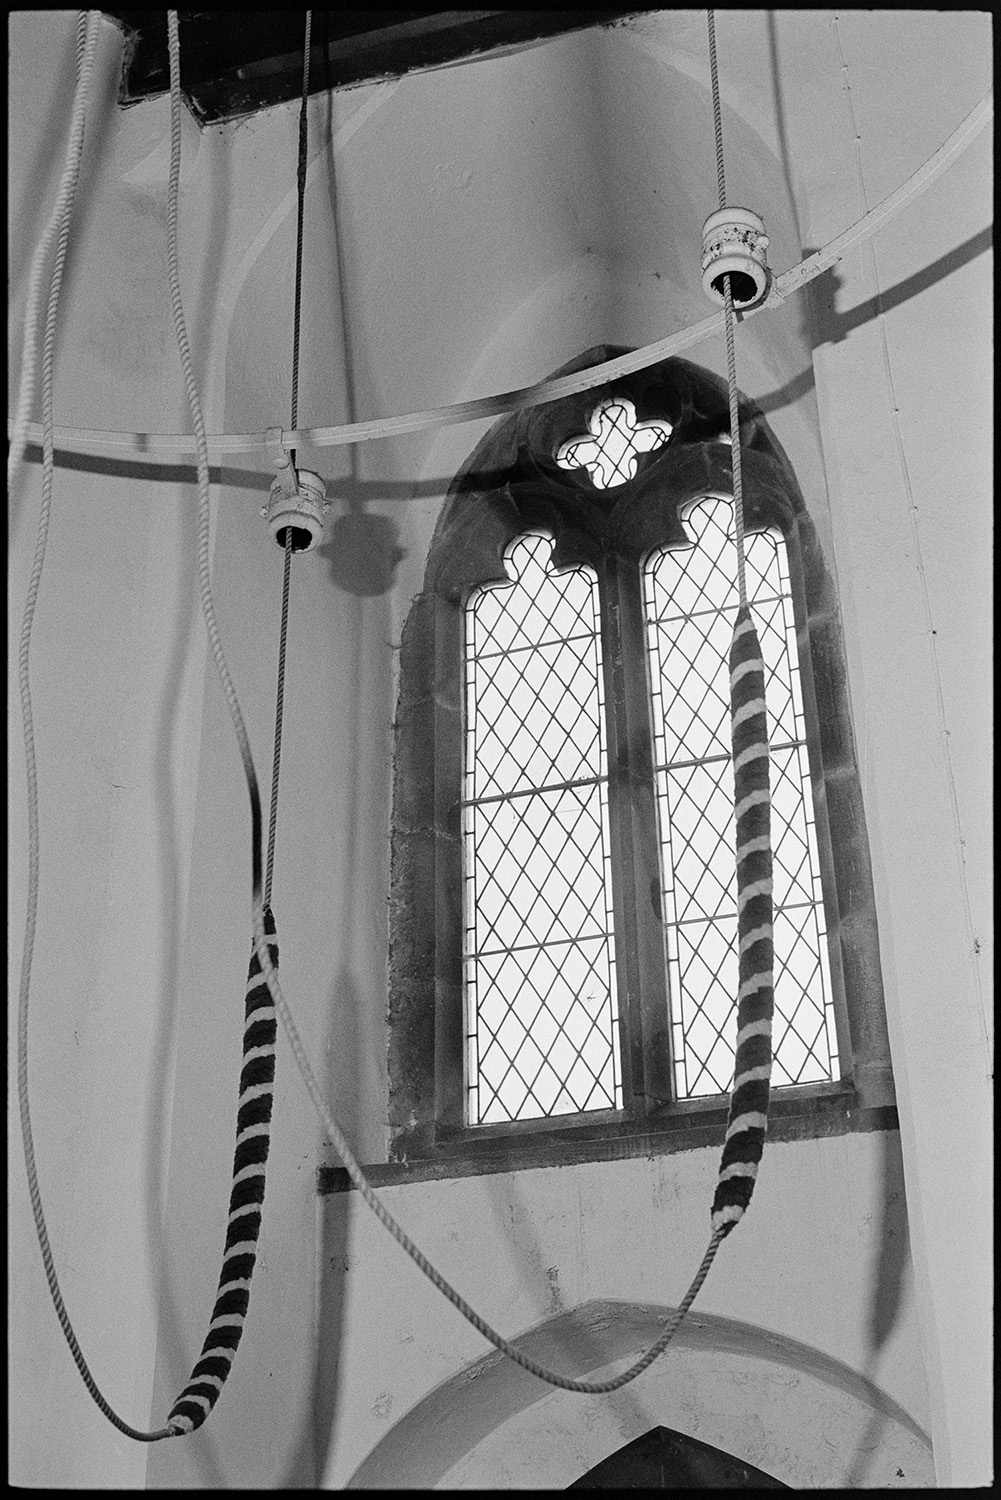 Church interior with bell ropes.
[ The interior of Brushford Church showing bell ropes and an arched window.]